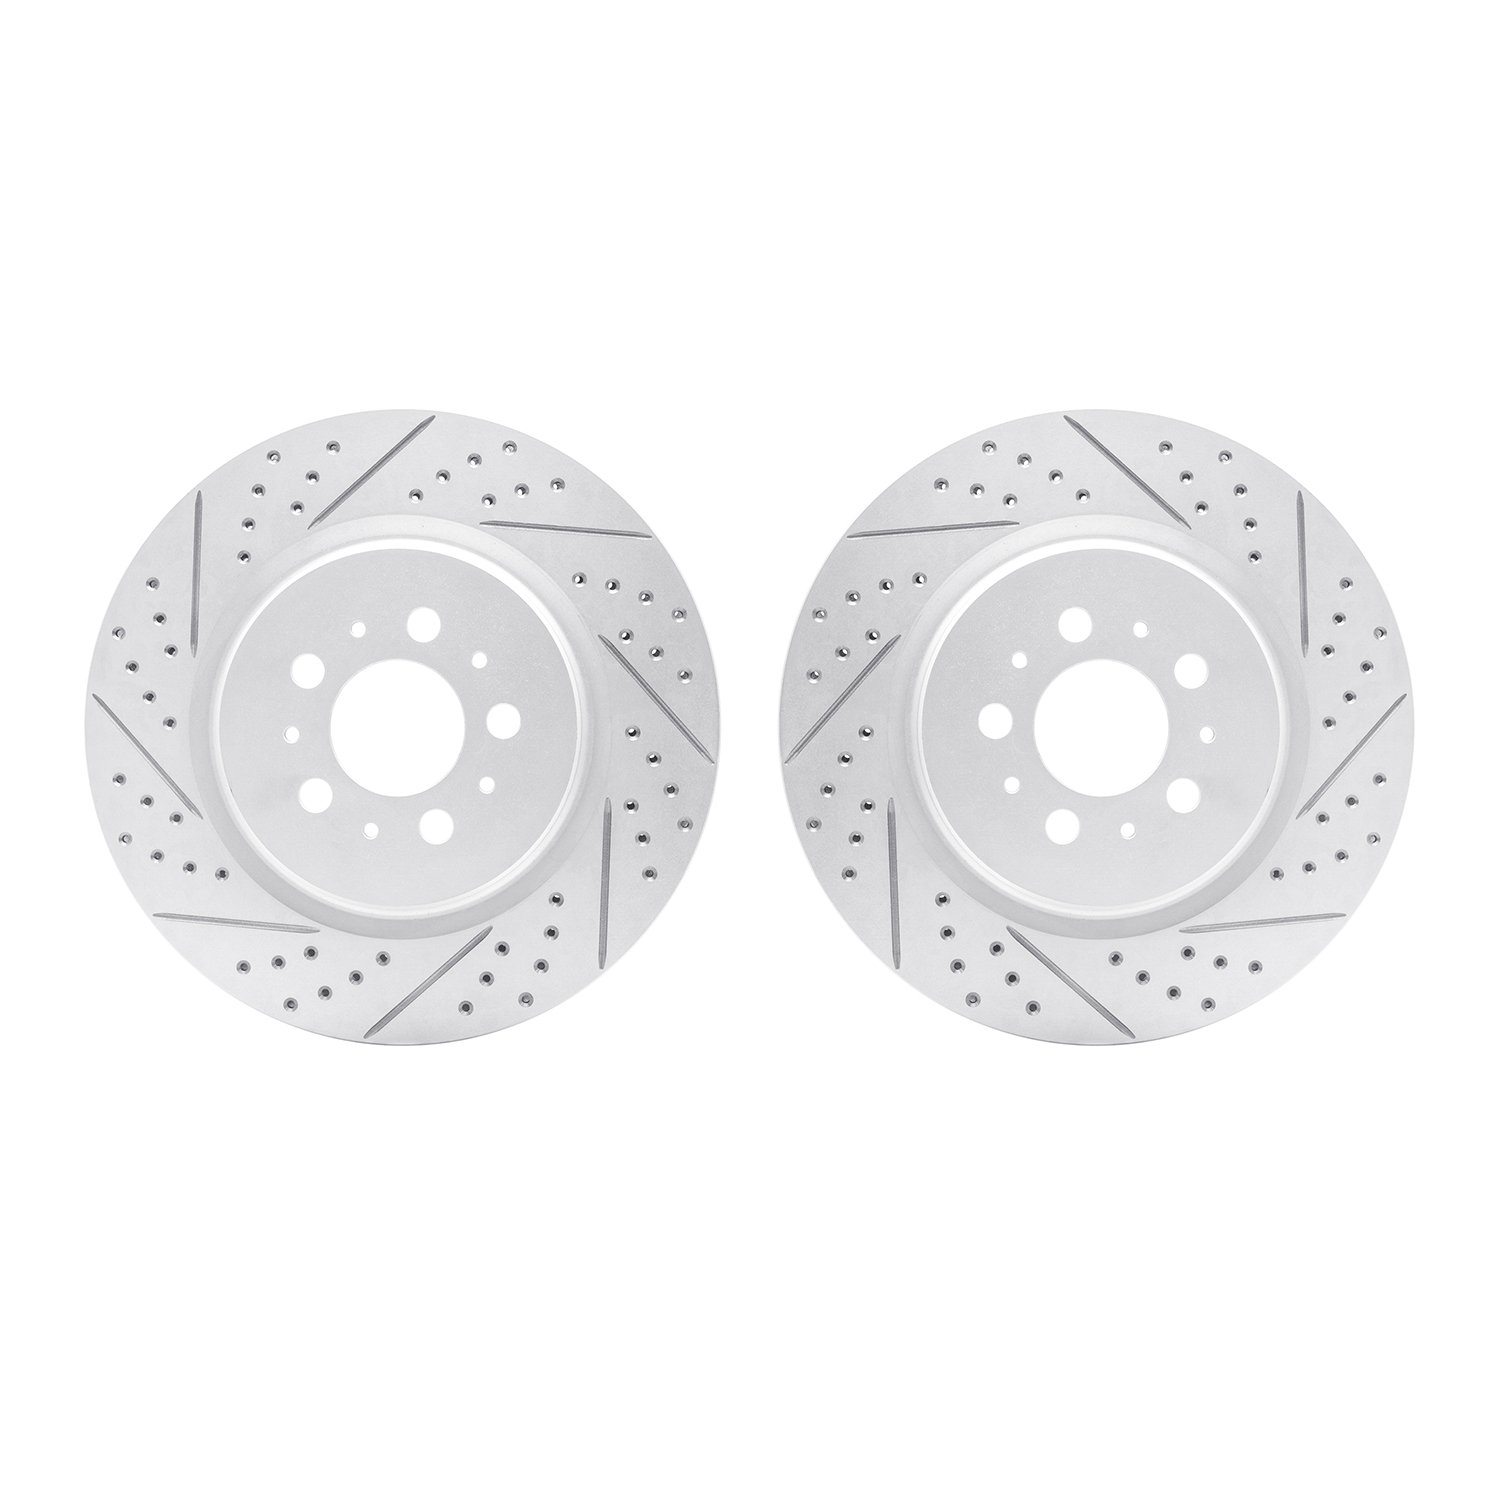 2002-27026 Geoperformance Drilled/Slotted Brake Rotors, 2004-2007 Volvo, Position: Rear